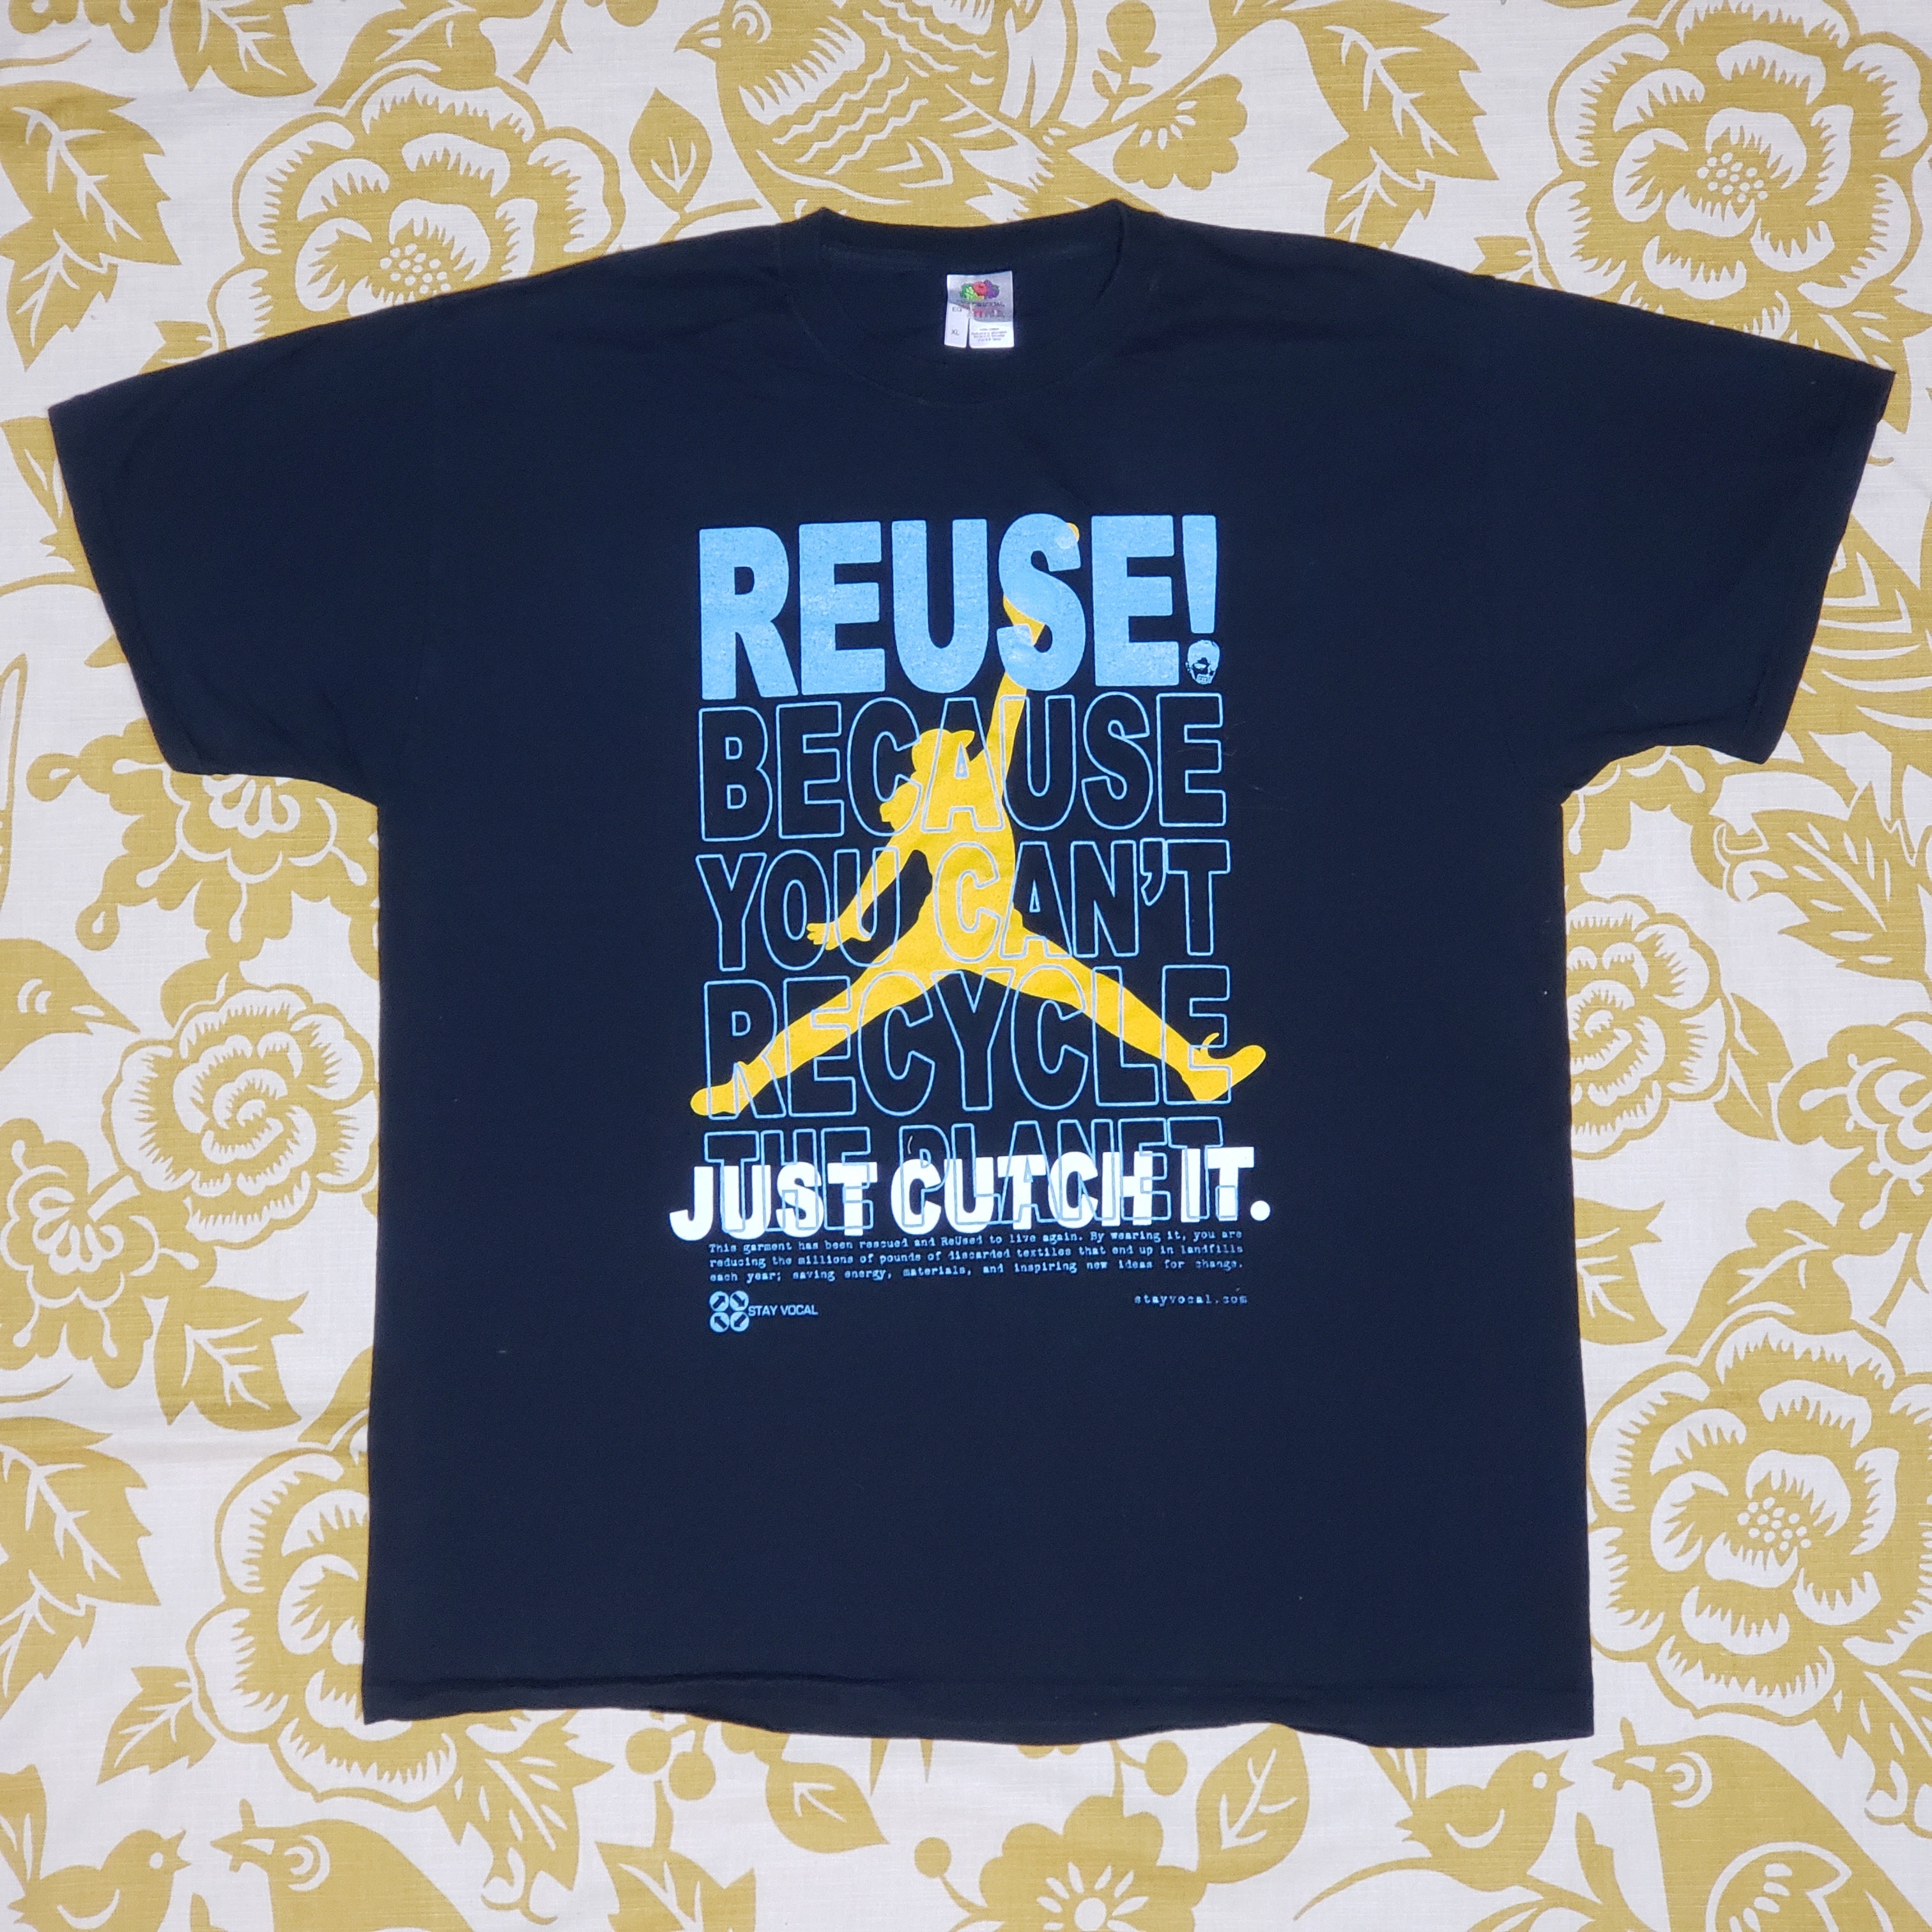 One of a Kind (Men's XL) REUSE! Air Andrew McCutchen Pittsburgh T-Shirt